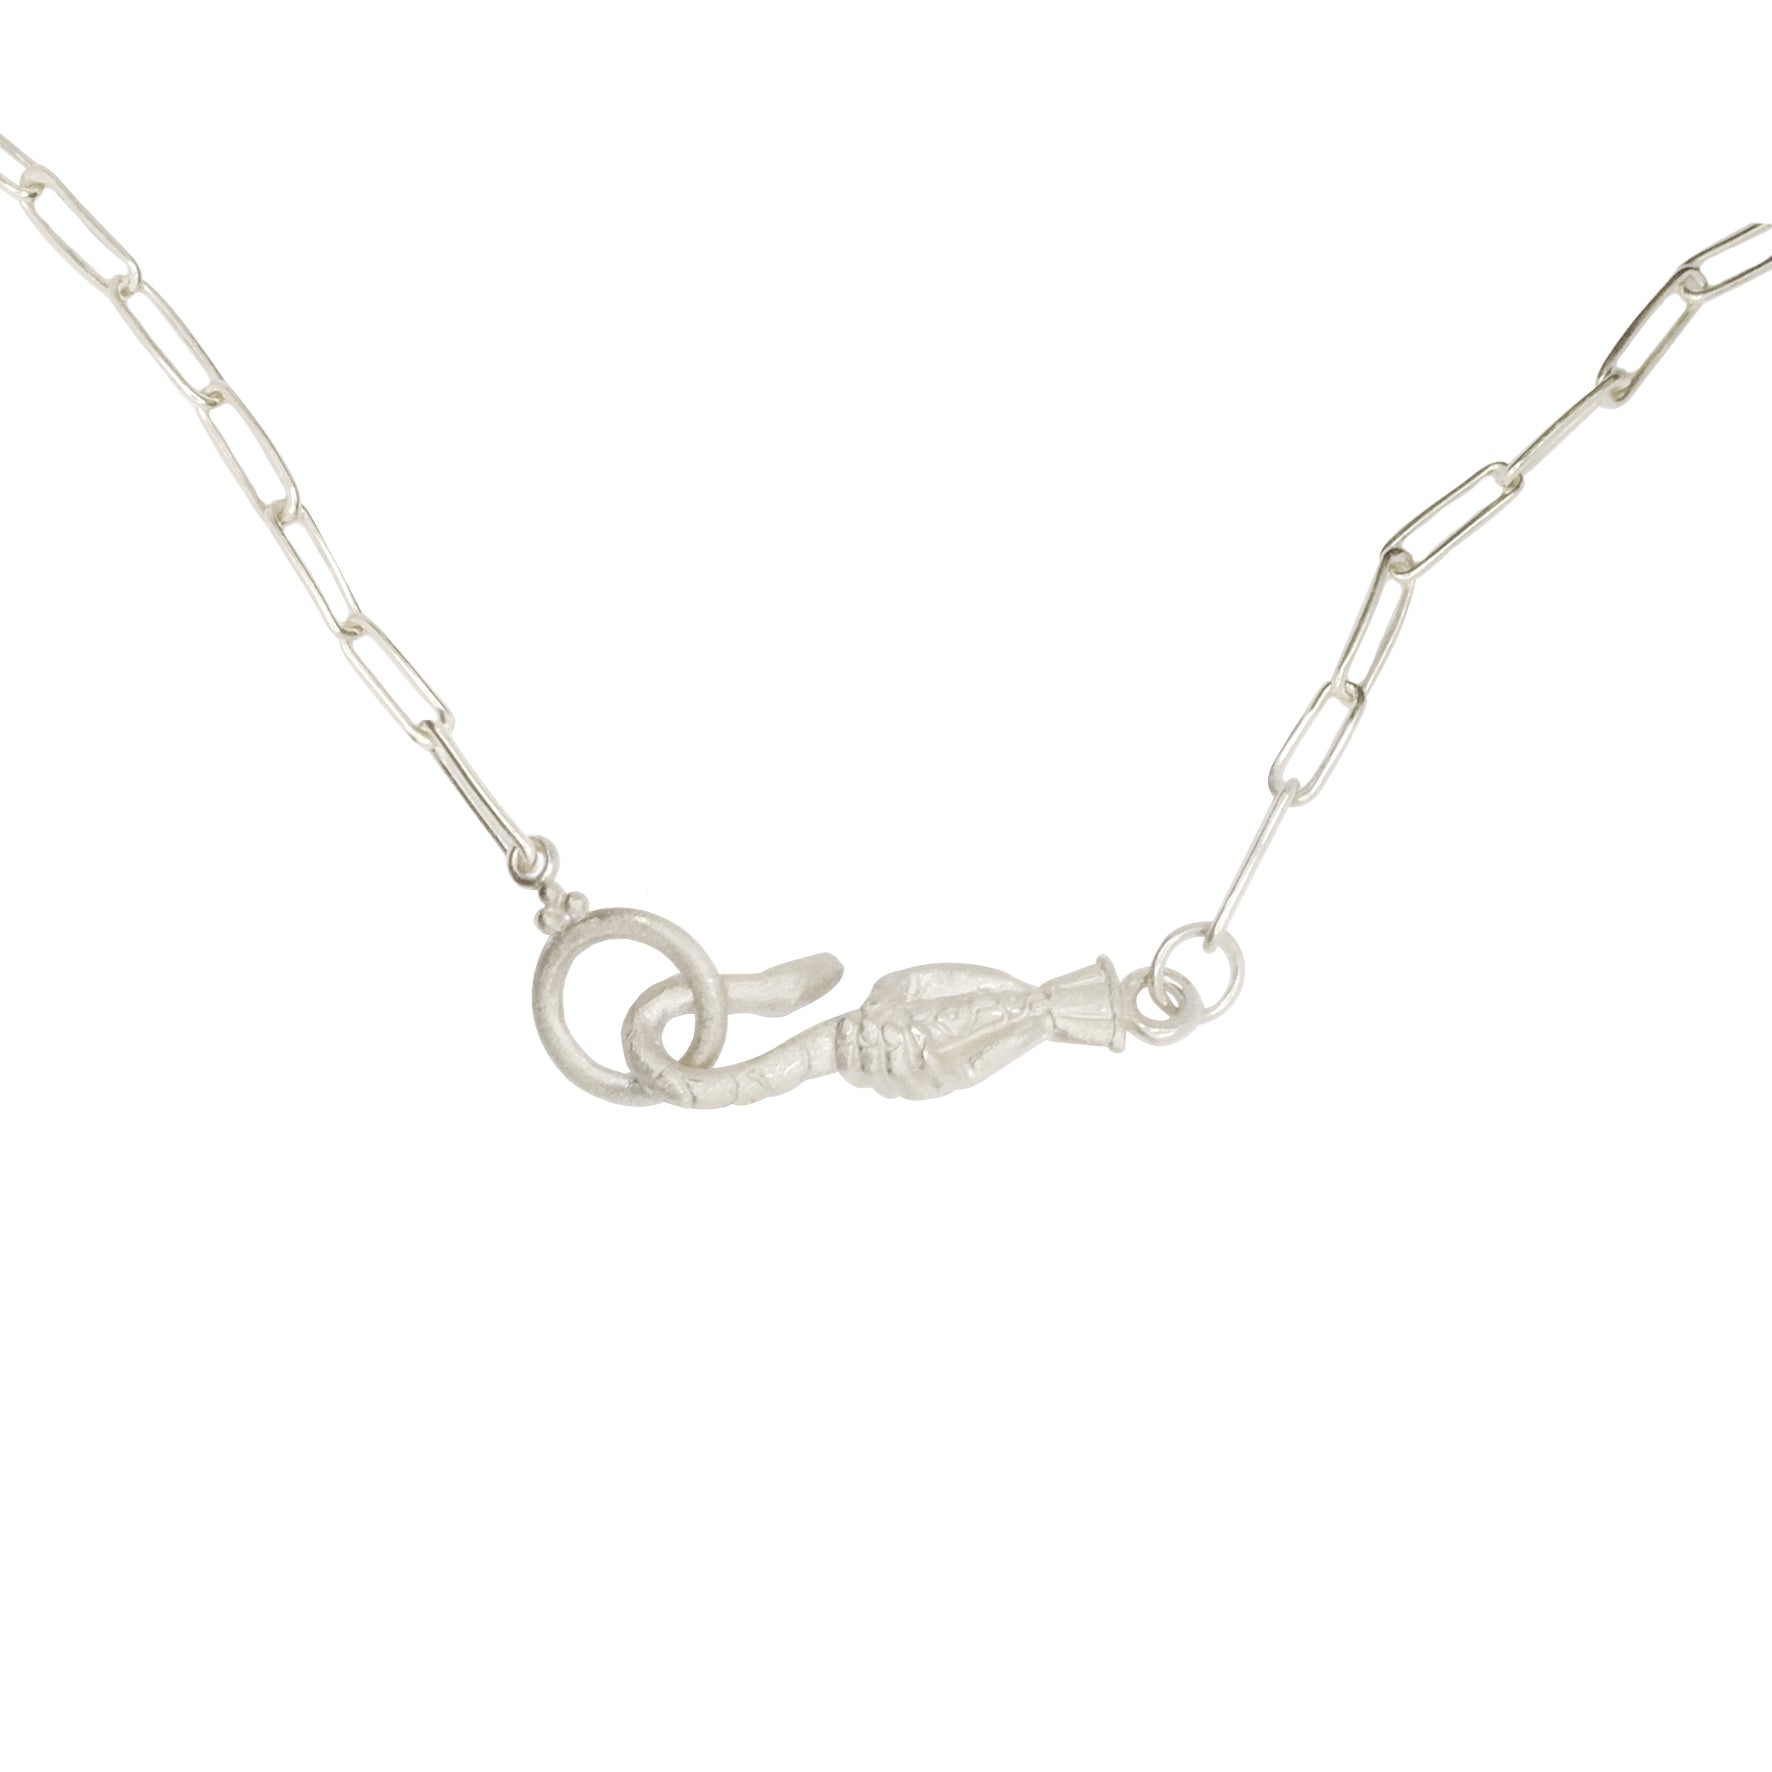 Hunt Of Hounds Serpent Hook Clip Chain Necklace. House made clip chain and signature hook. A hand holding a serpent.